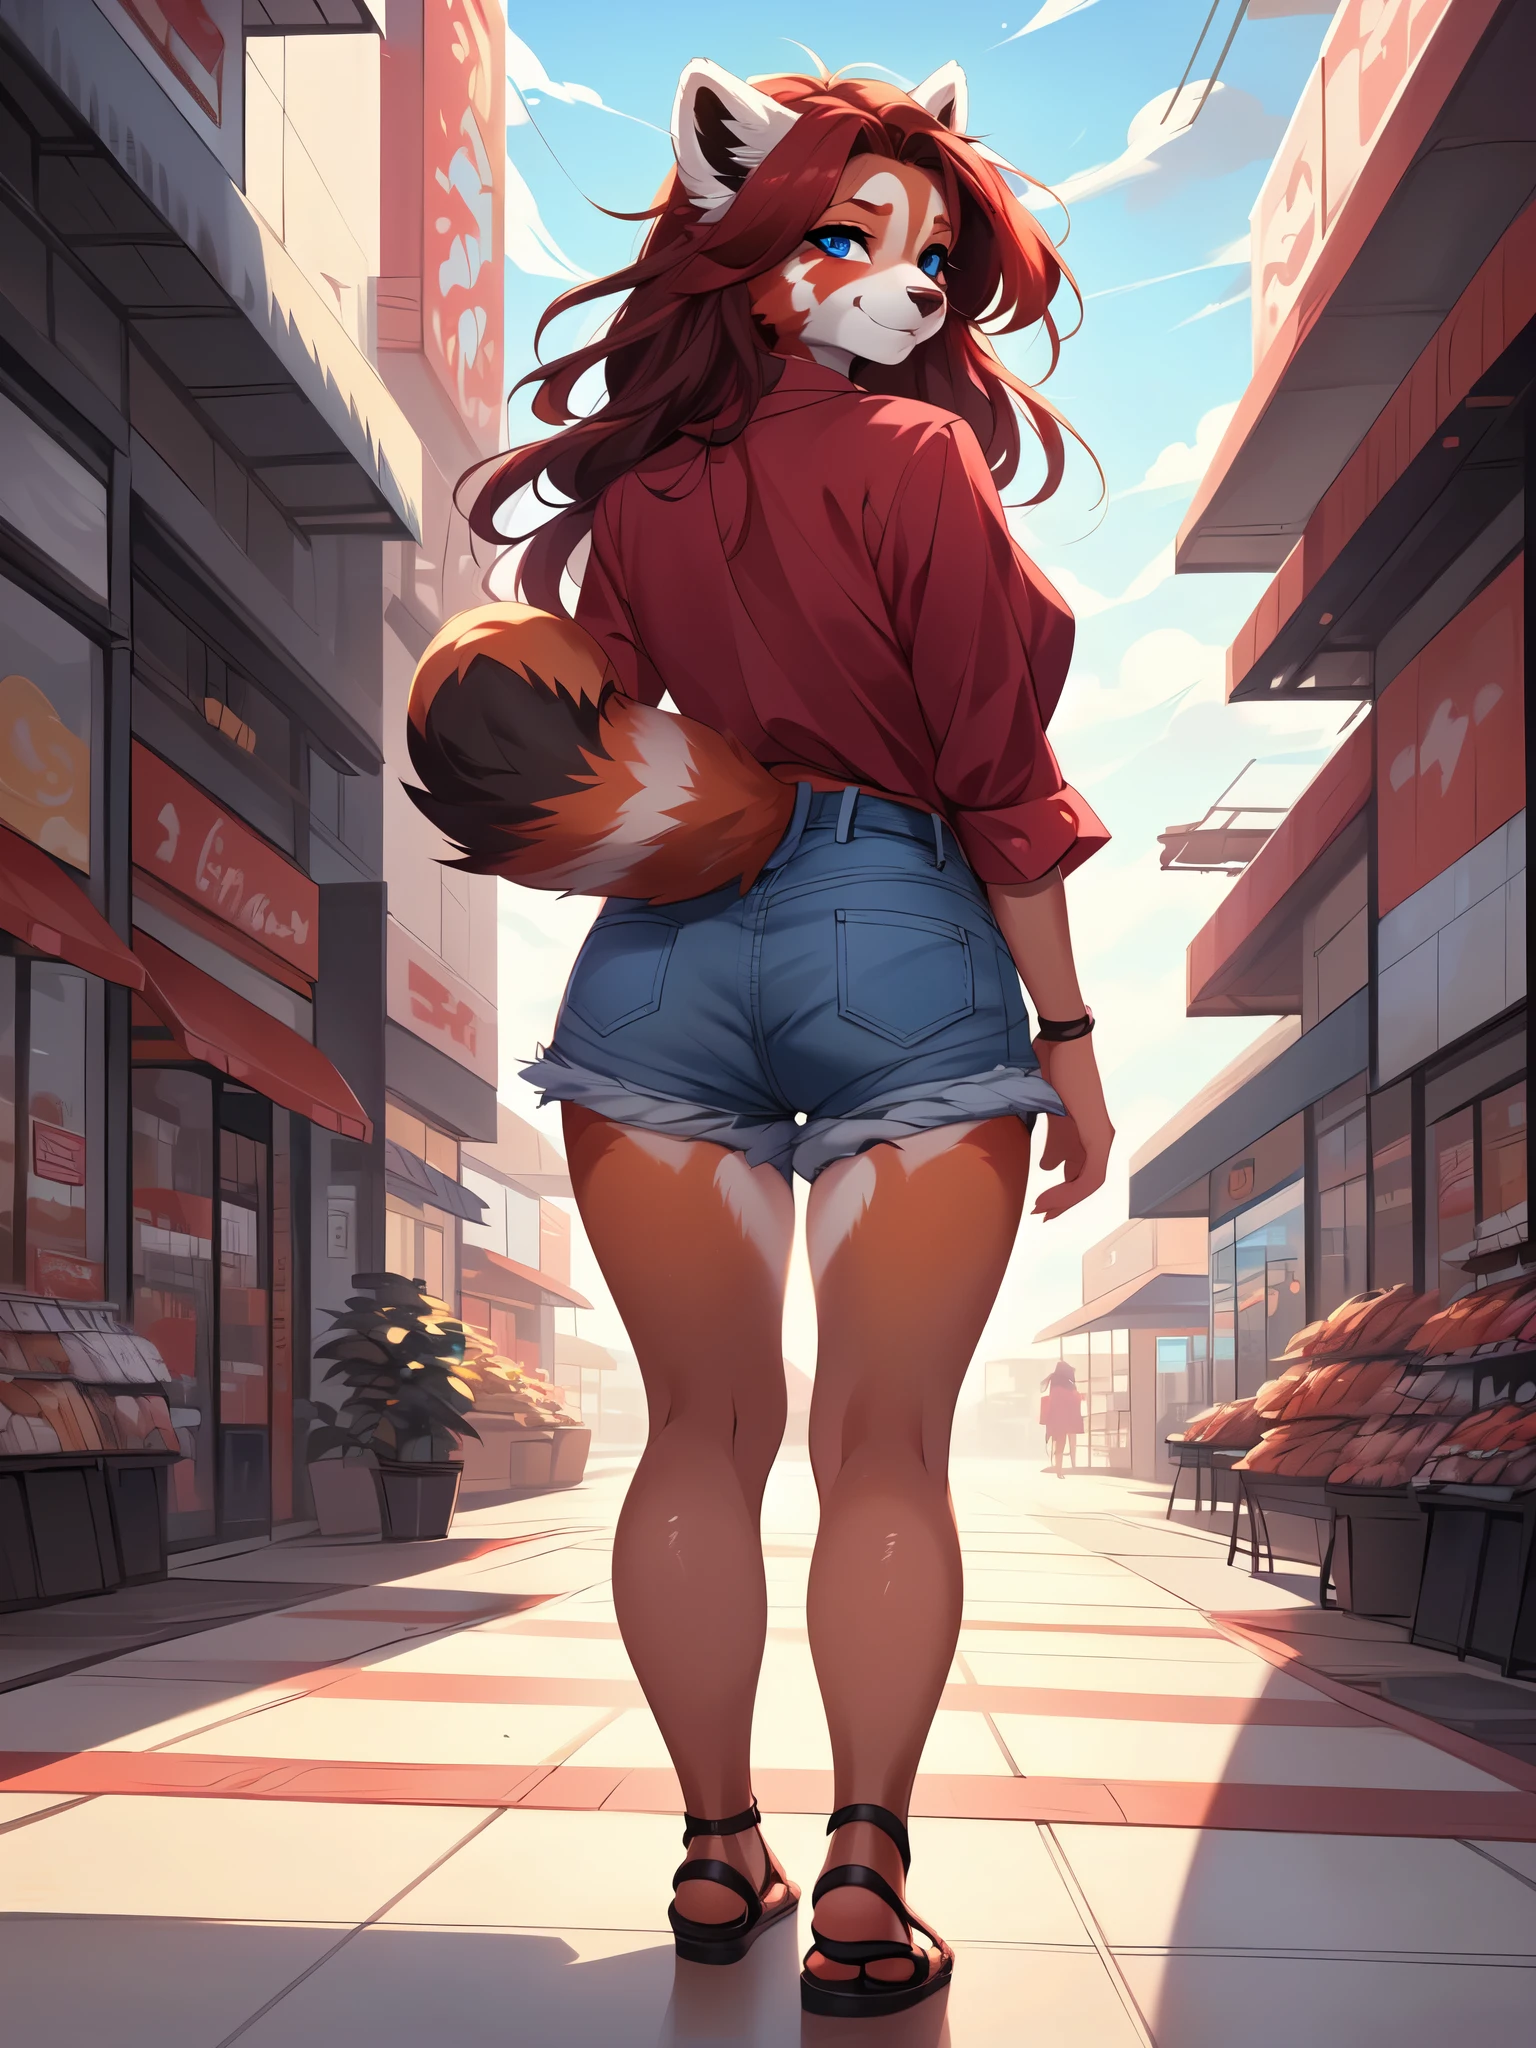 By fumiko, by hyattlen, by hioshiru, a cute red panda girl, red panda face markings, red panda tail, long red hair, blue eyes, ((wearing red blouse, jean short shorts, black sandals, from behind, walking down a strip mall, looking back at viewer, pov